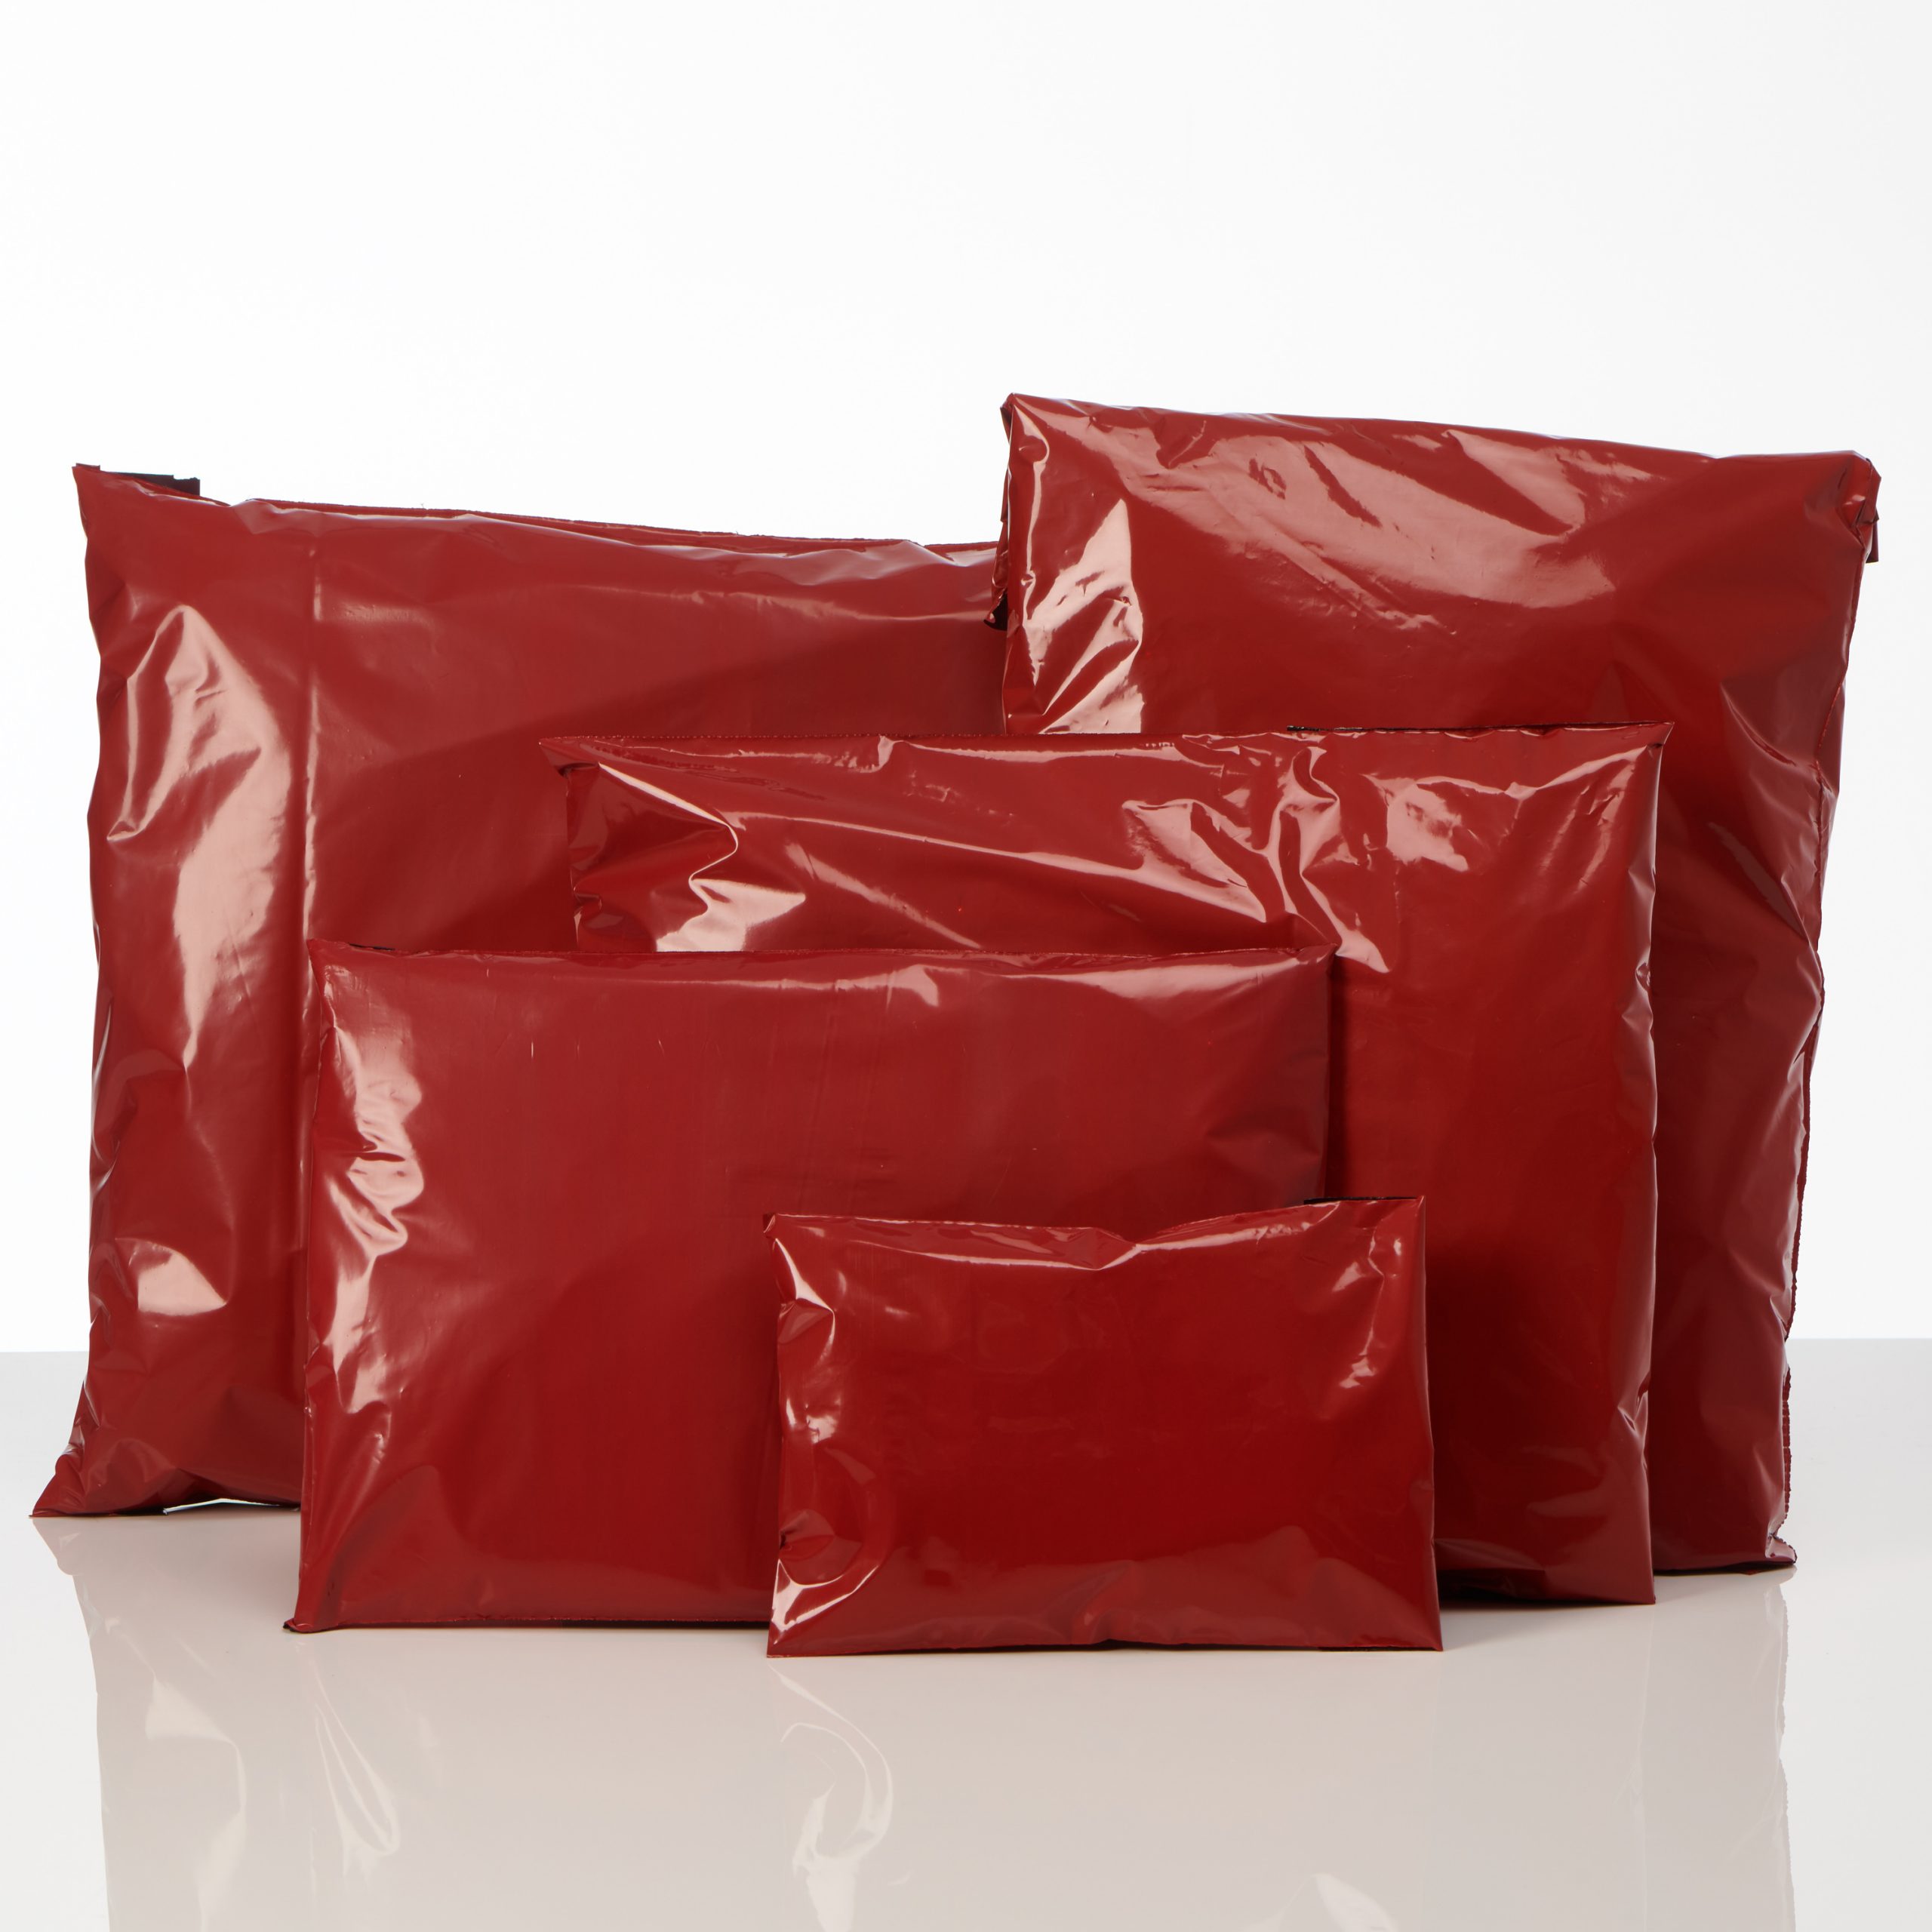 310X405mm Red Parcel Bags Royal Mail Small Parcel Poly Postal Bags 12 X 16" 